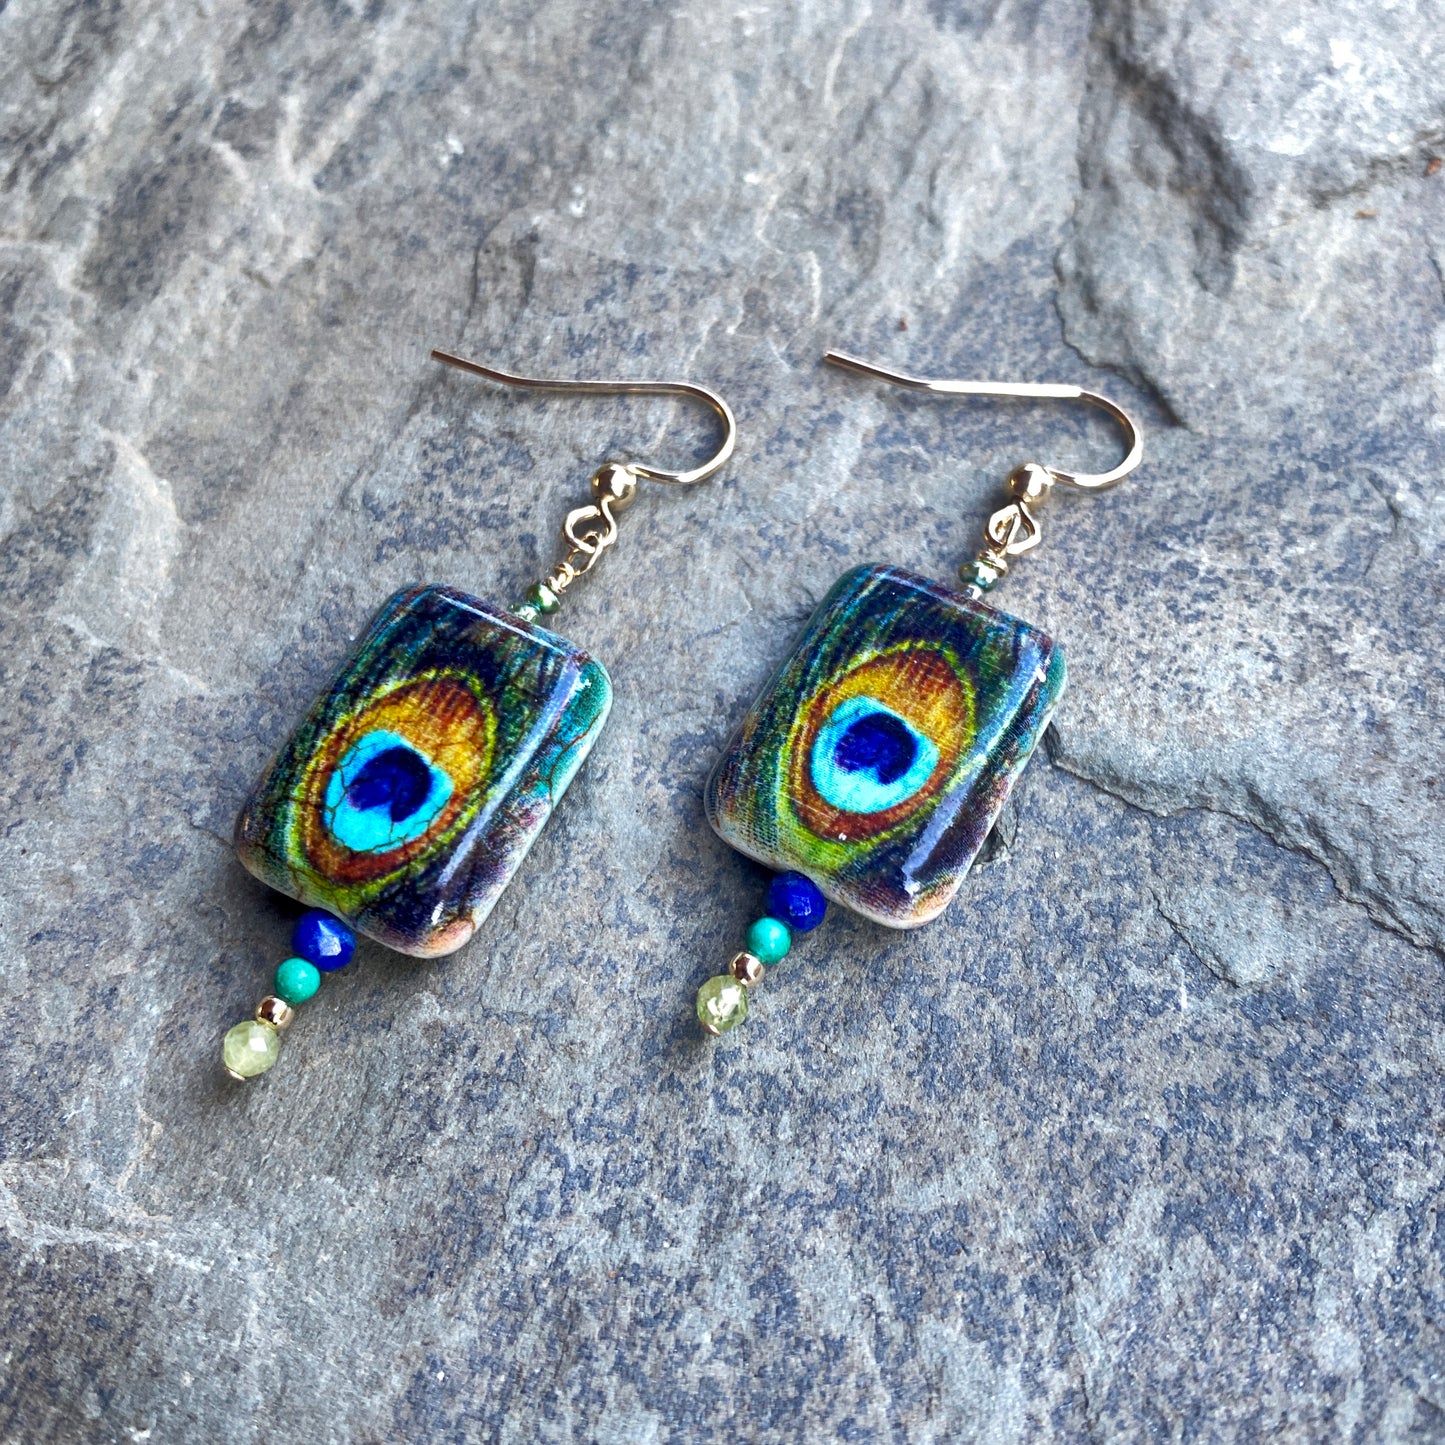 Women's Painted Peacock with Peridot, Turquoise Gemstone Earrings